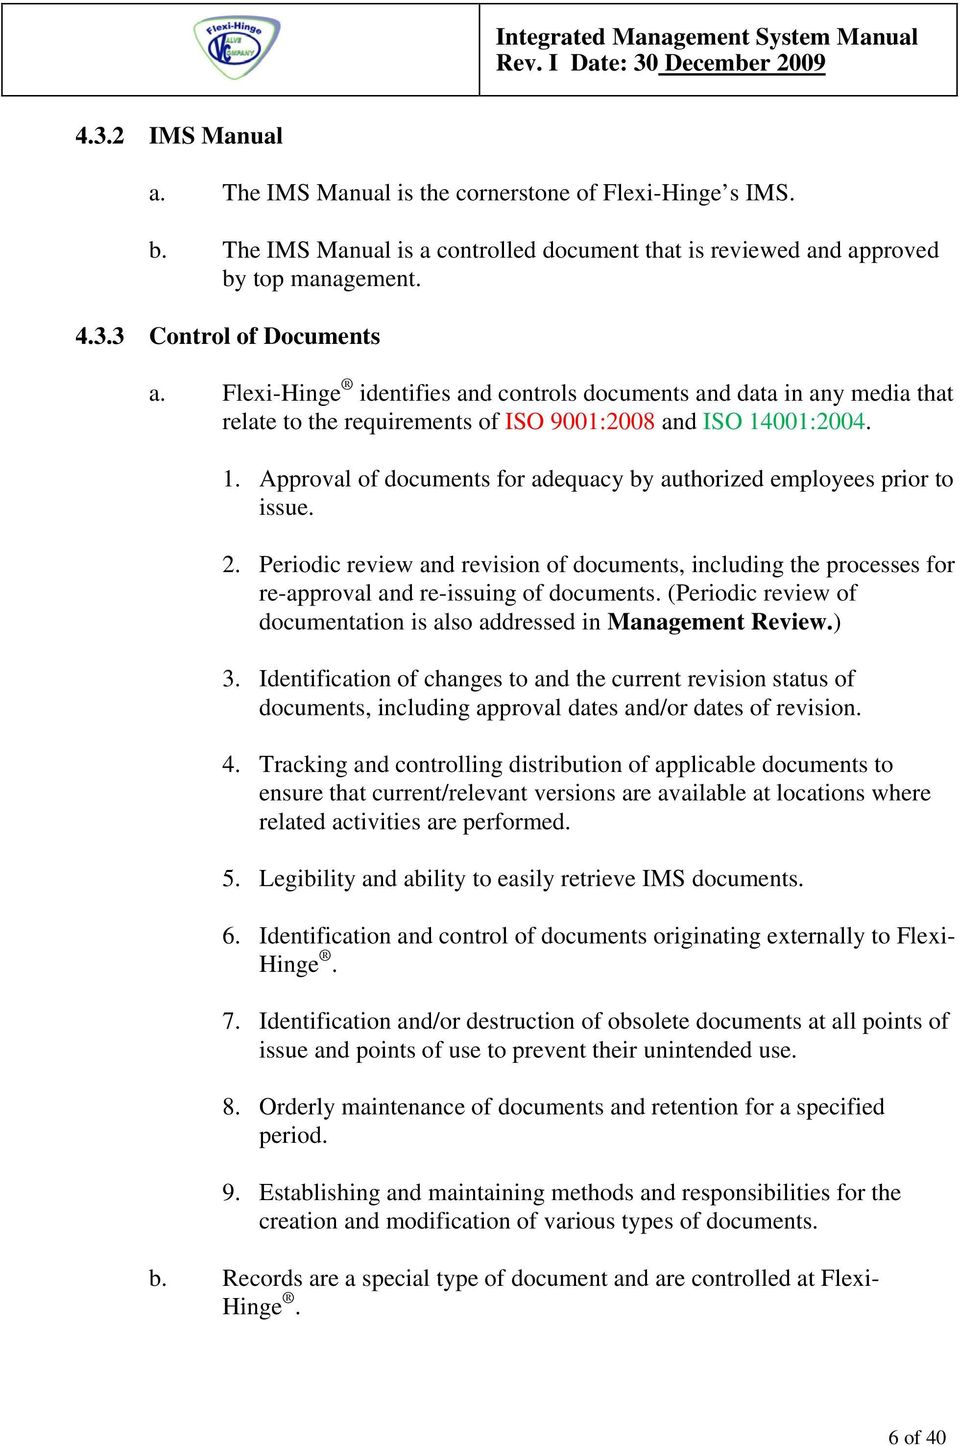 001:2004. 1. Approval of documents for adequacy by authorized employees prior to issue. 2.